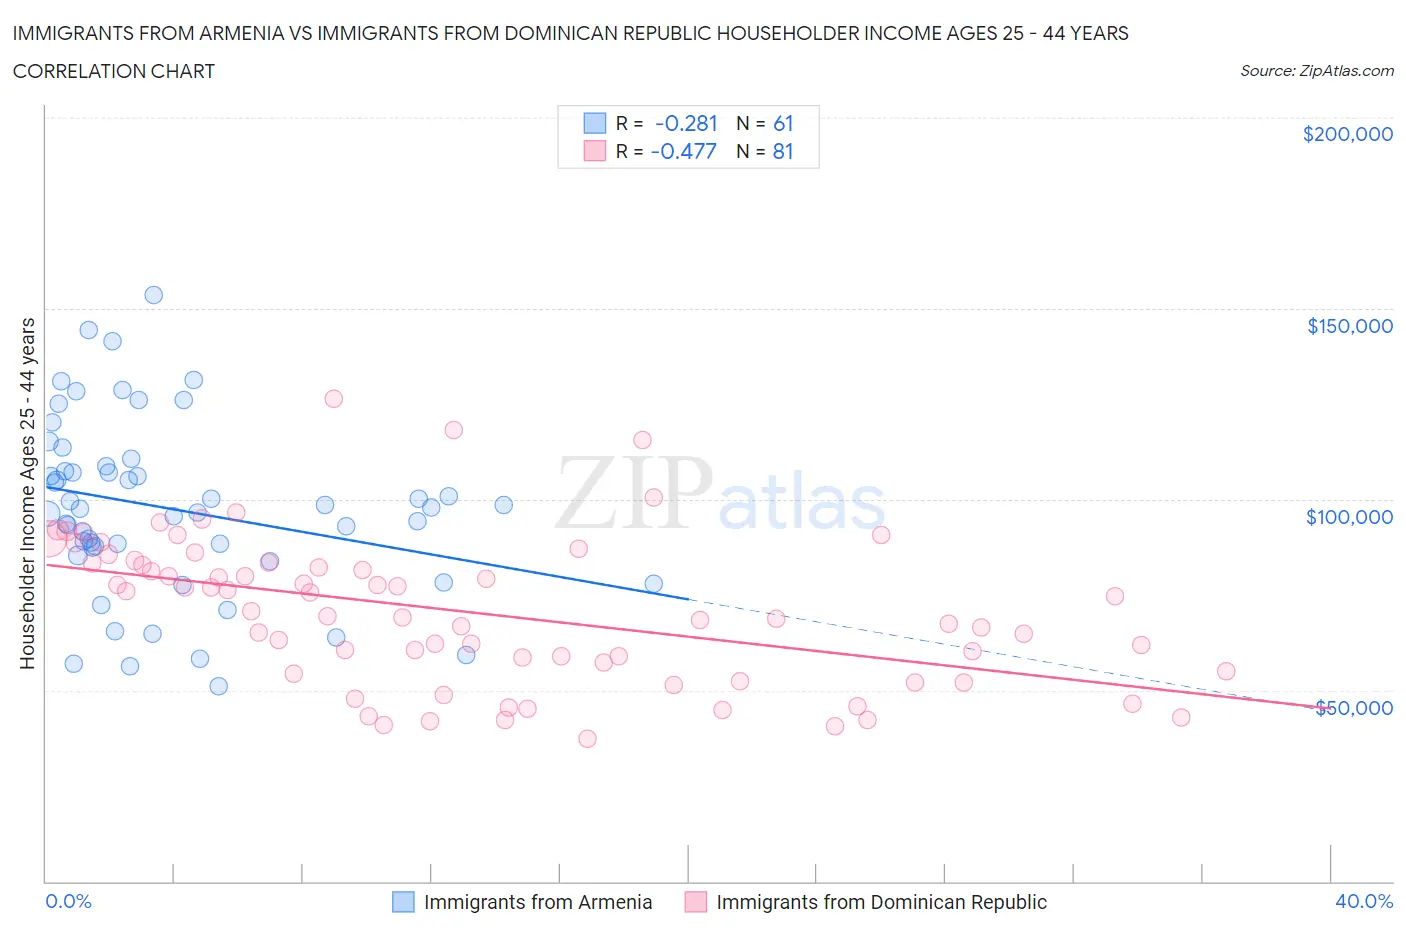 Immigrants from Armenia vs Immigrants from Dominican Republic Householder Income Ages 25 - 44 years